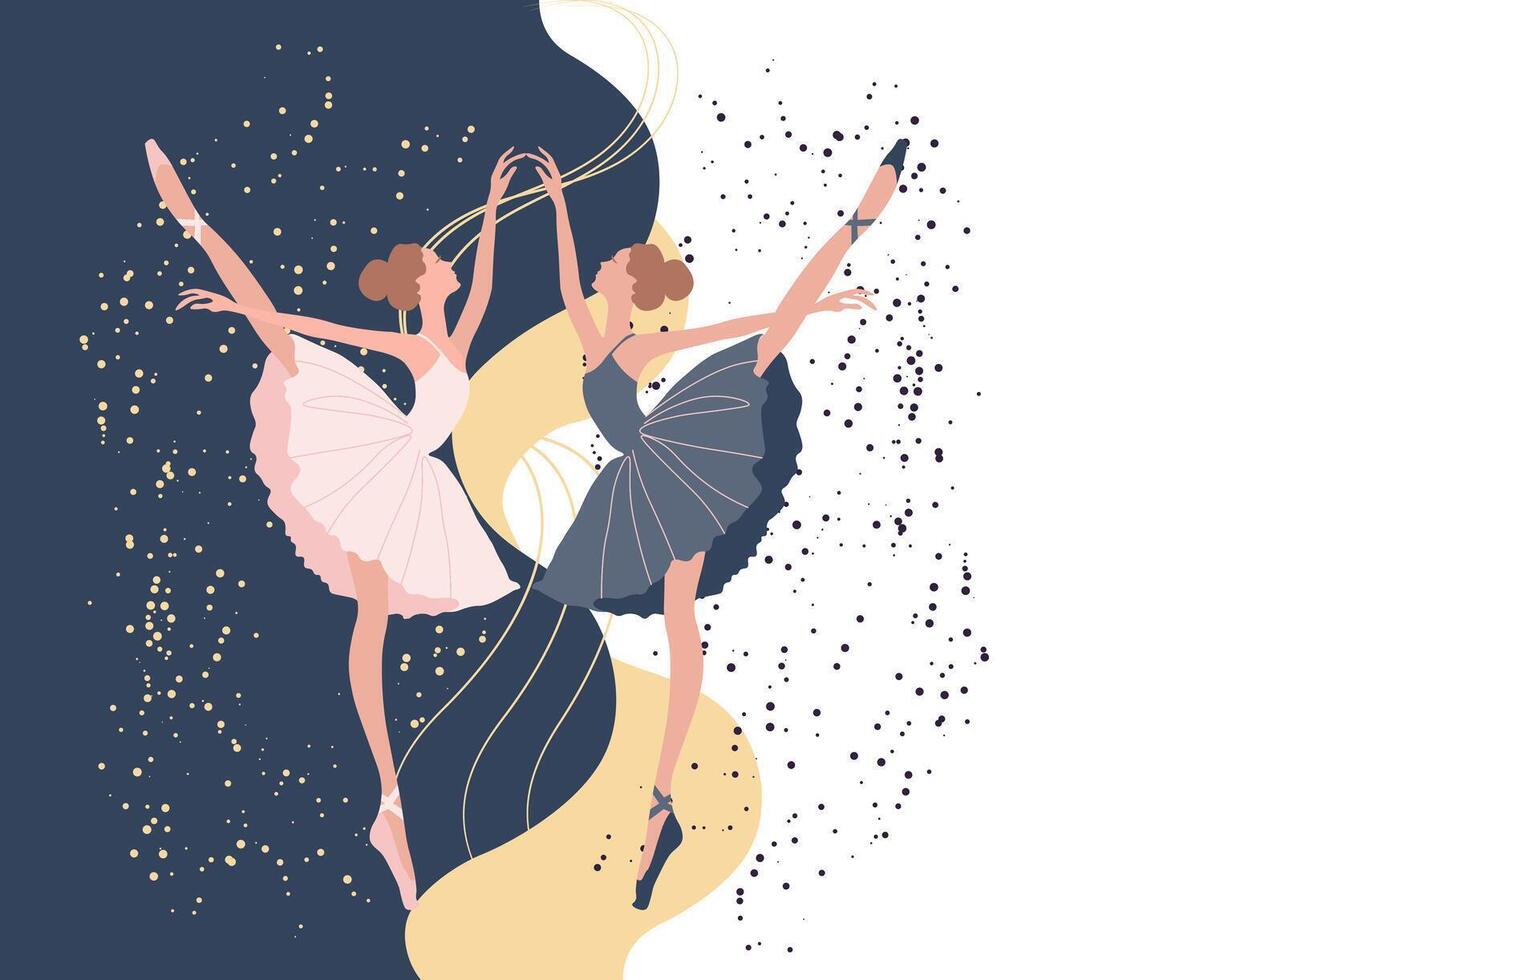 A pair of dancing ballerinas in pink and blue dresses and pointe shoes. Illustration, vector